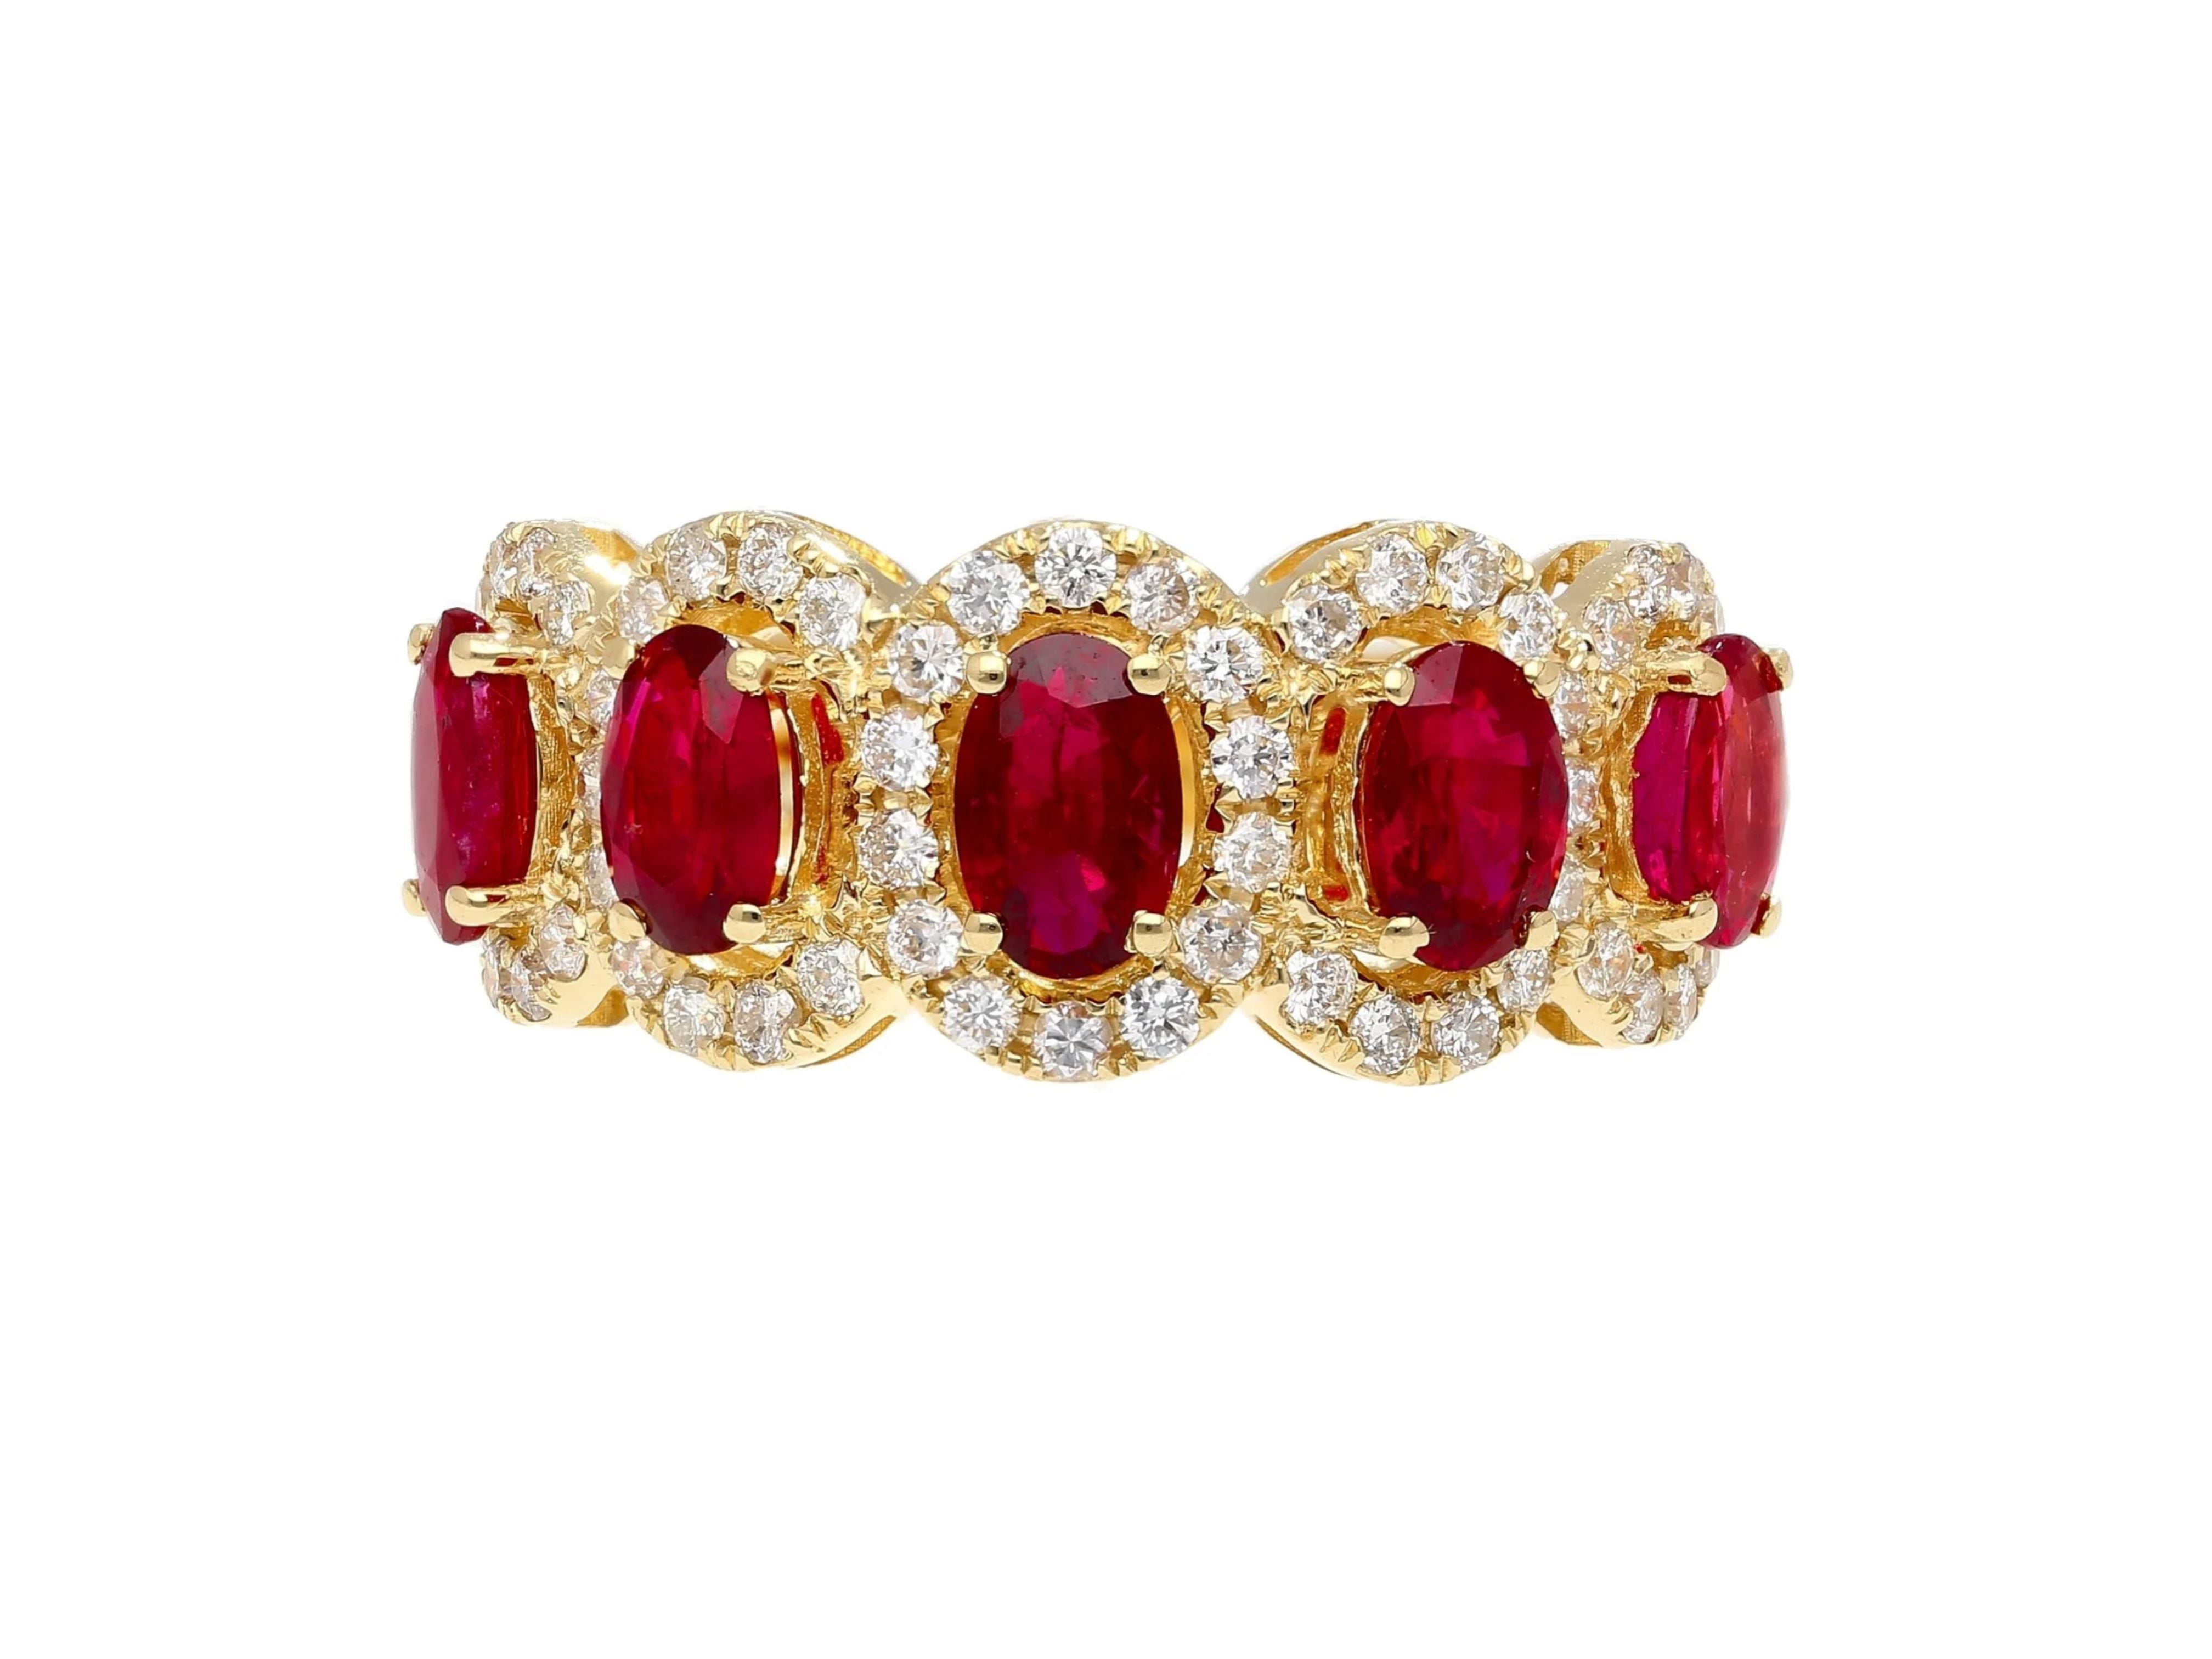 3_43-Carat-Oval-Cut-Ruby-and-Diamond-Halo-Wedding-Band-Ring-in-18K-Gold-Band.jpg